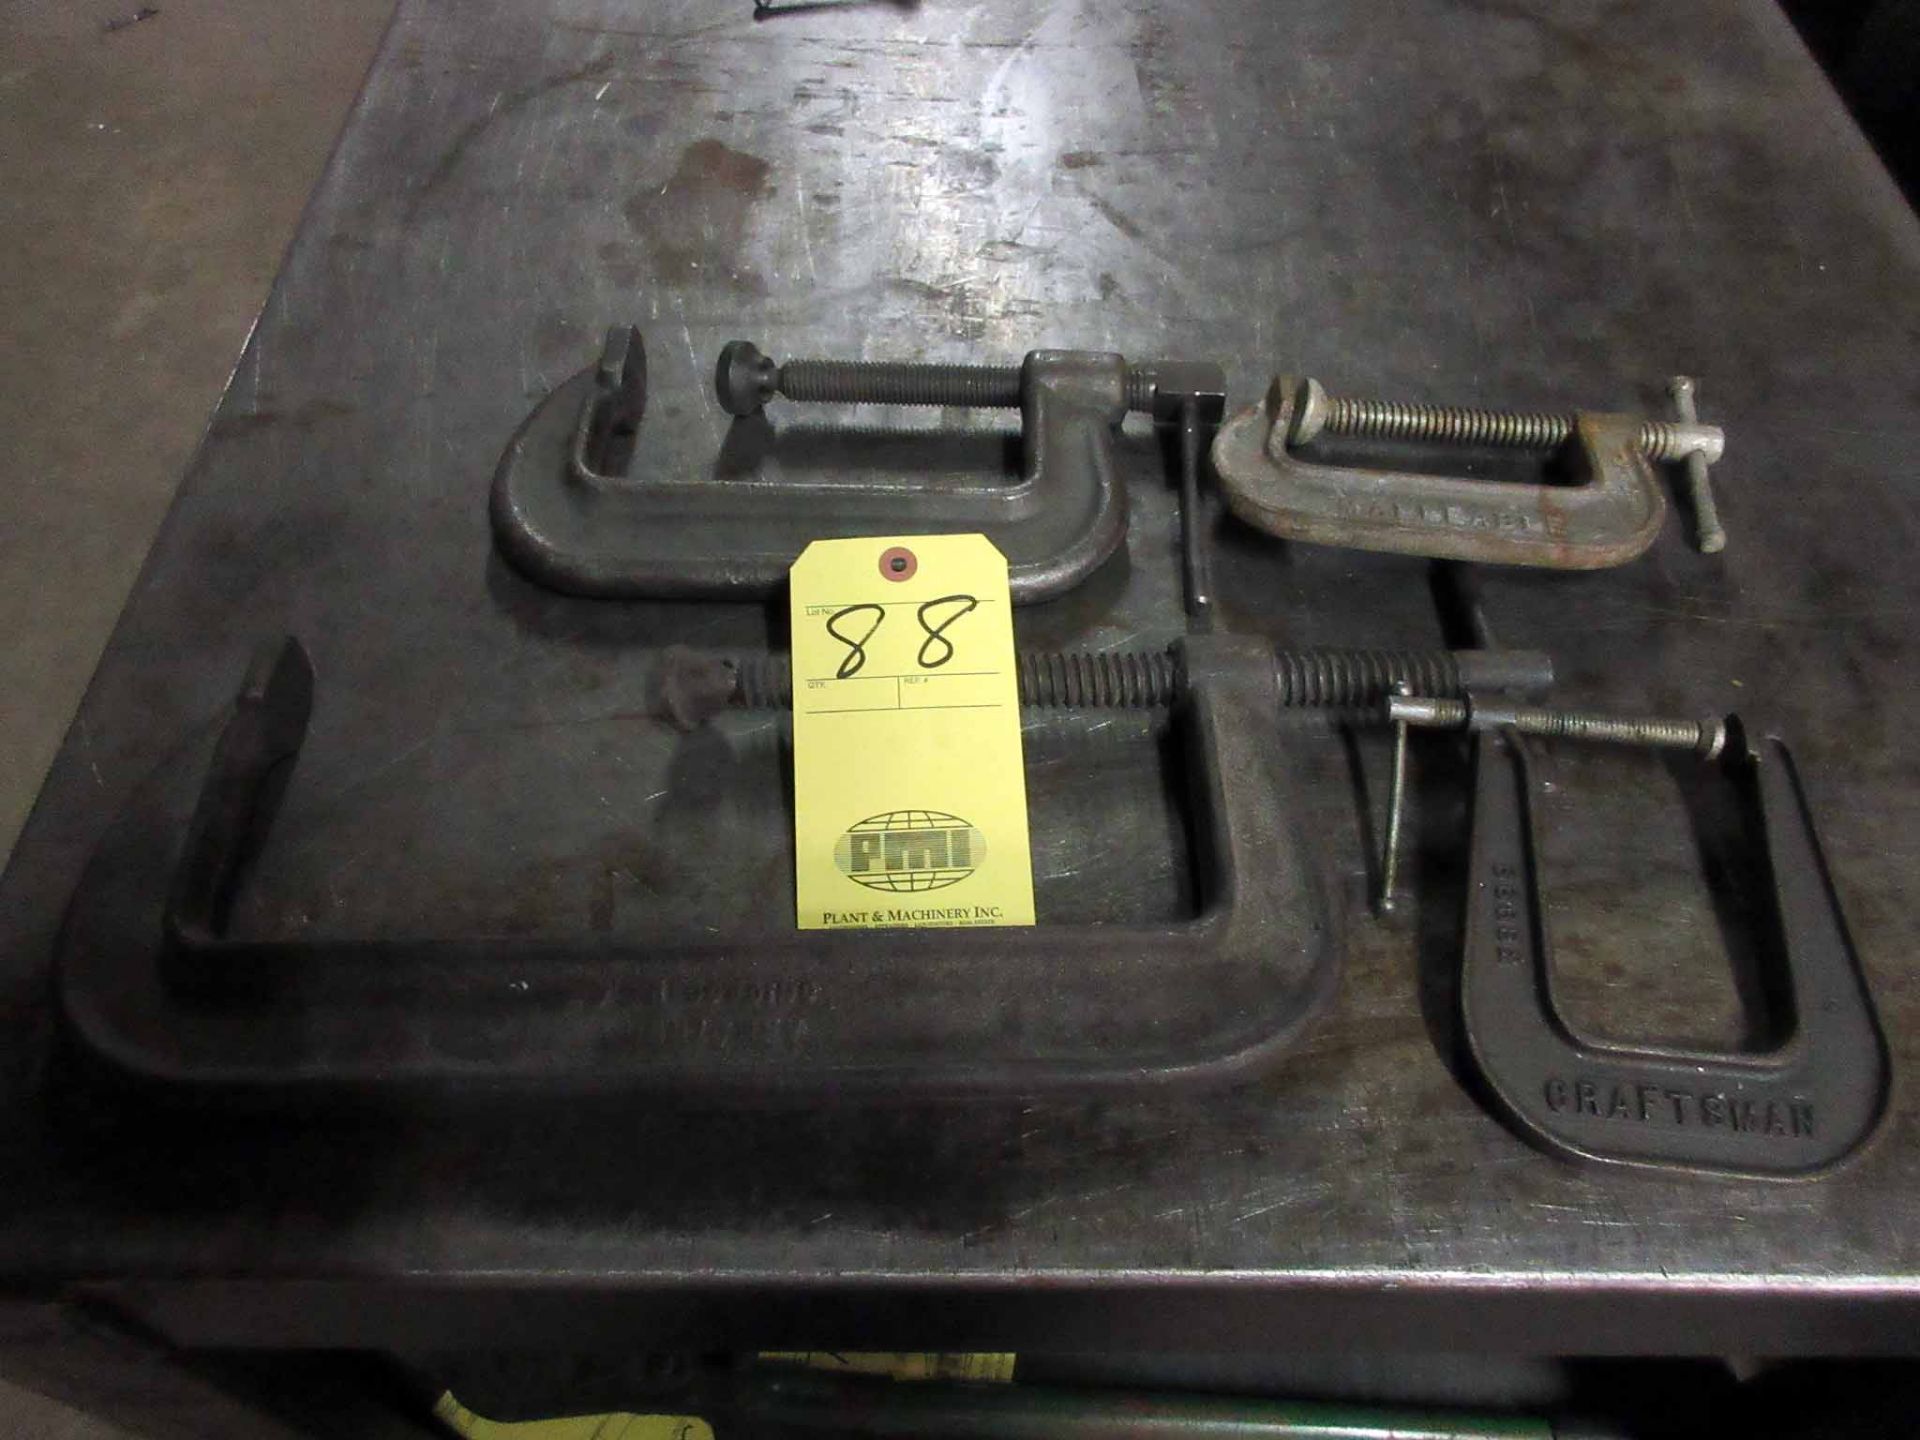 LOT OF C-CLAMPS (4): 12", 6", 4", 3"